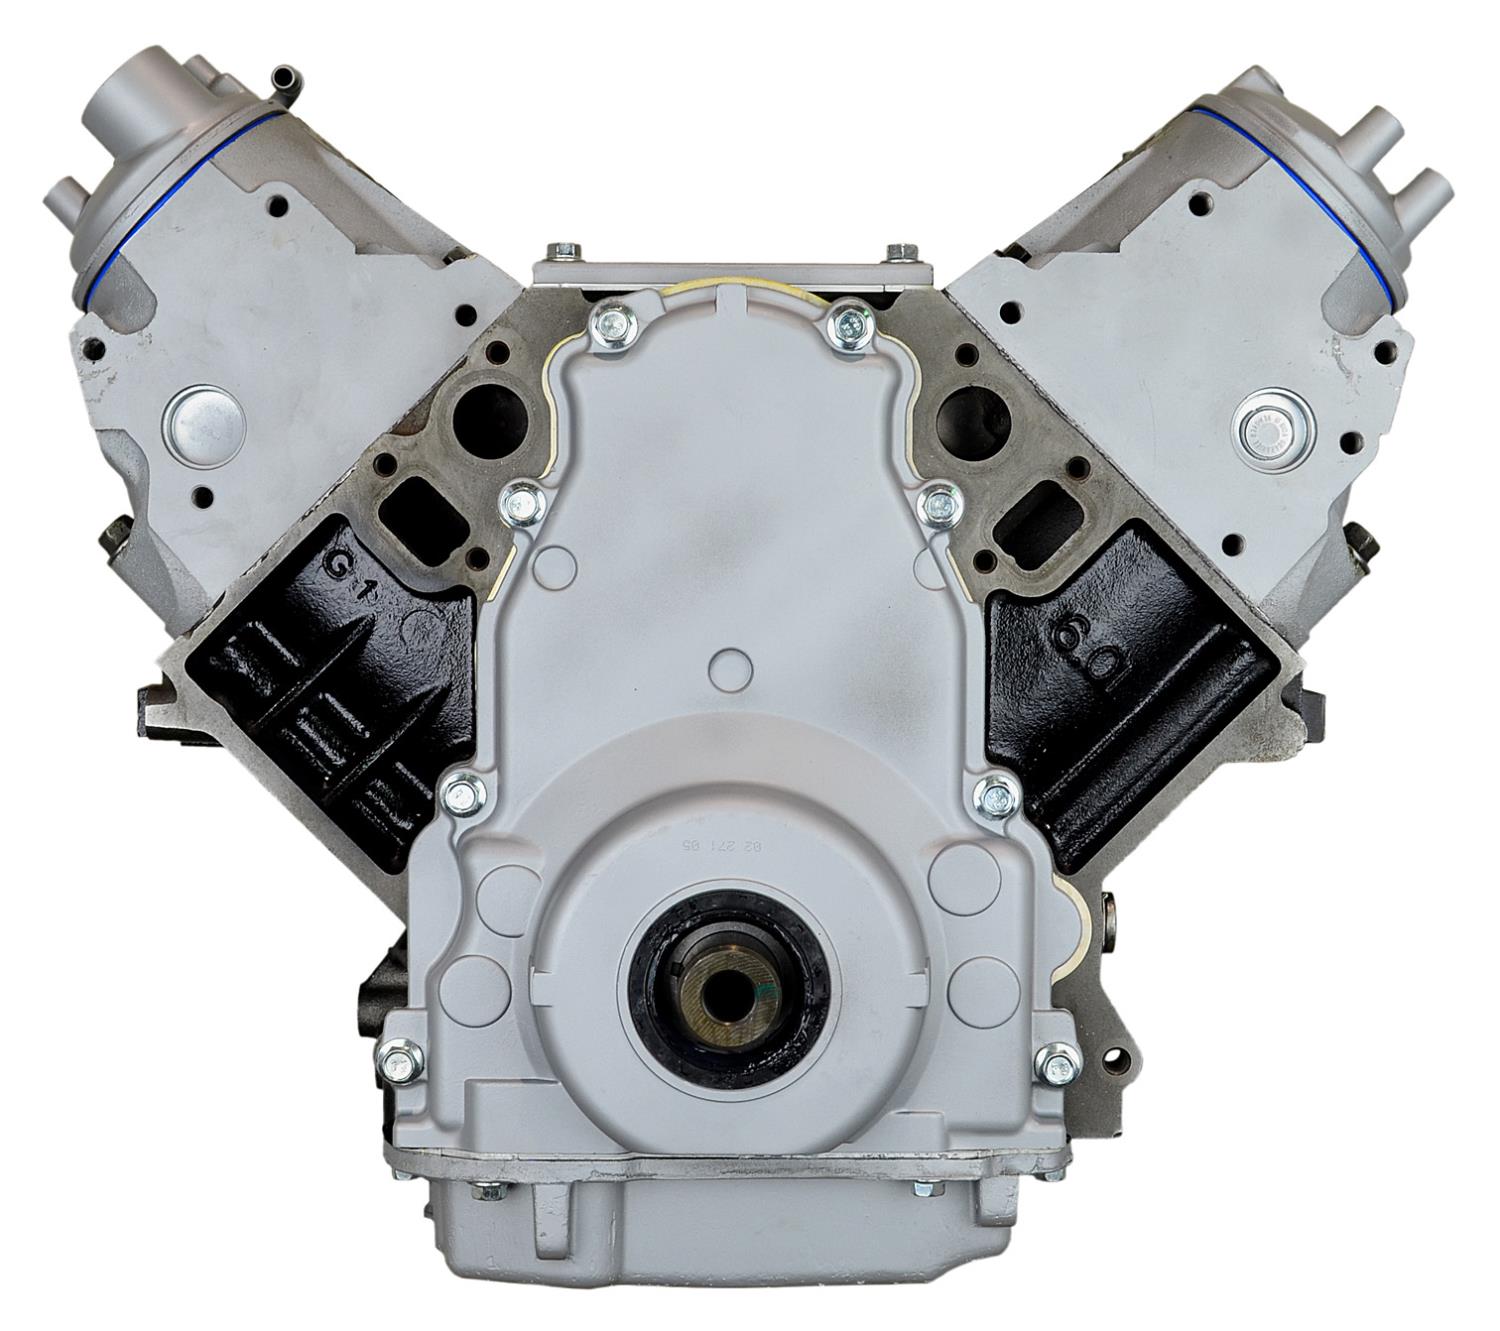 Remanufactured Crate Engine for 2001-2007 Chevy/GMC HD Truck, SUV & Van with 6.0L V8